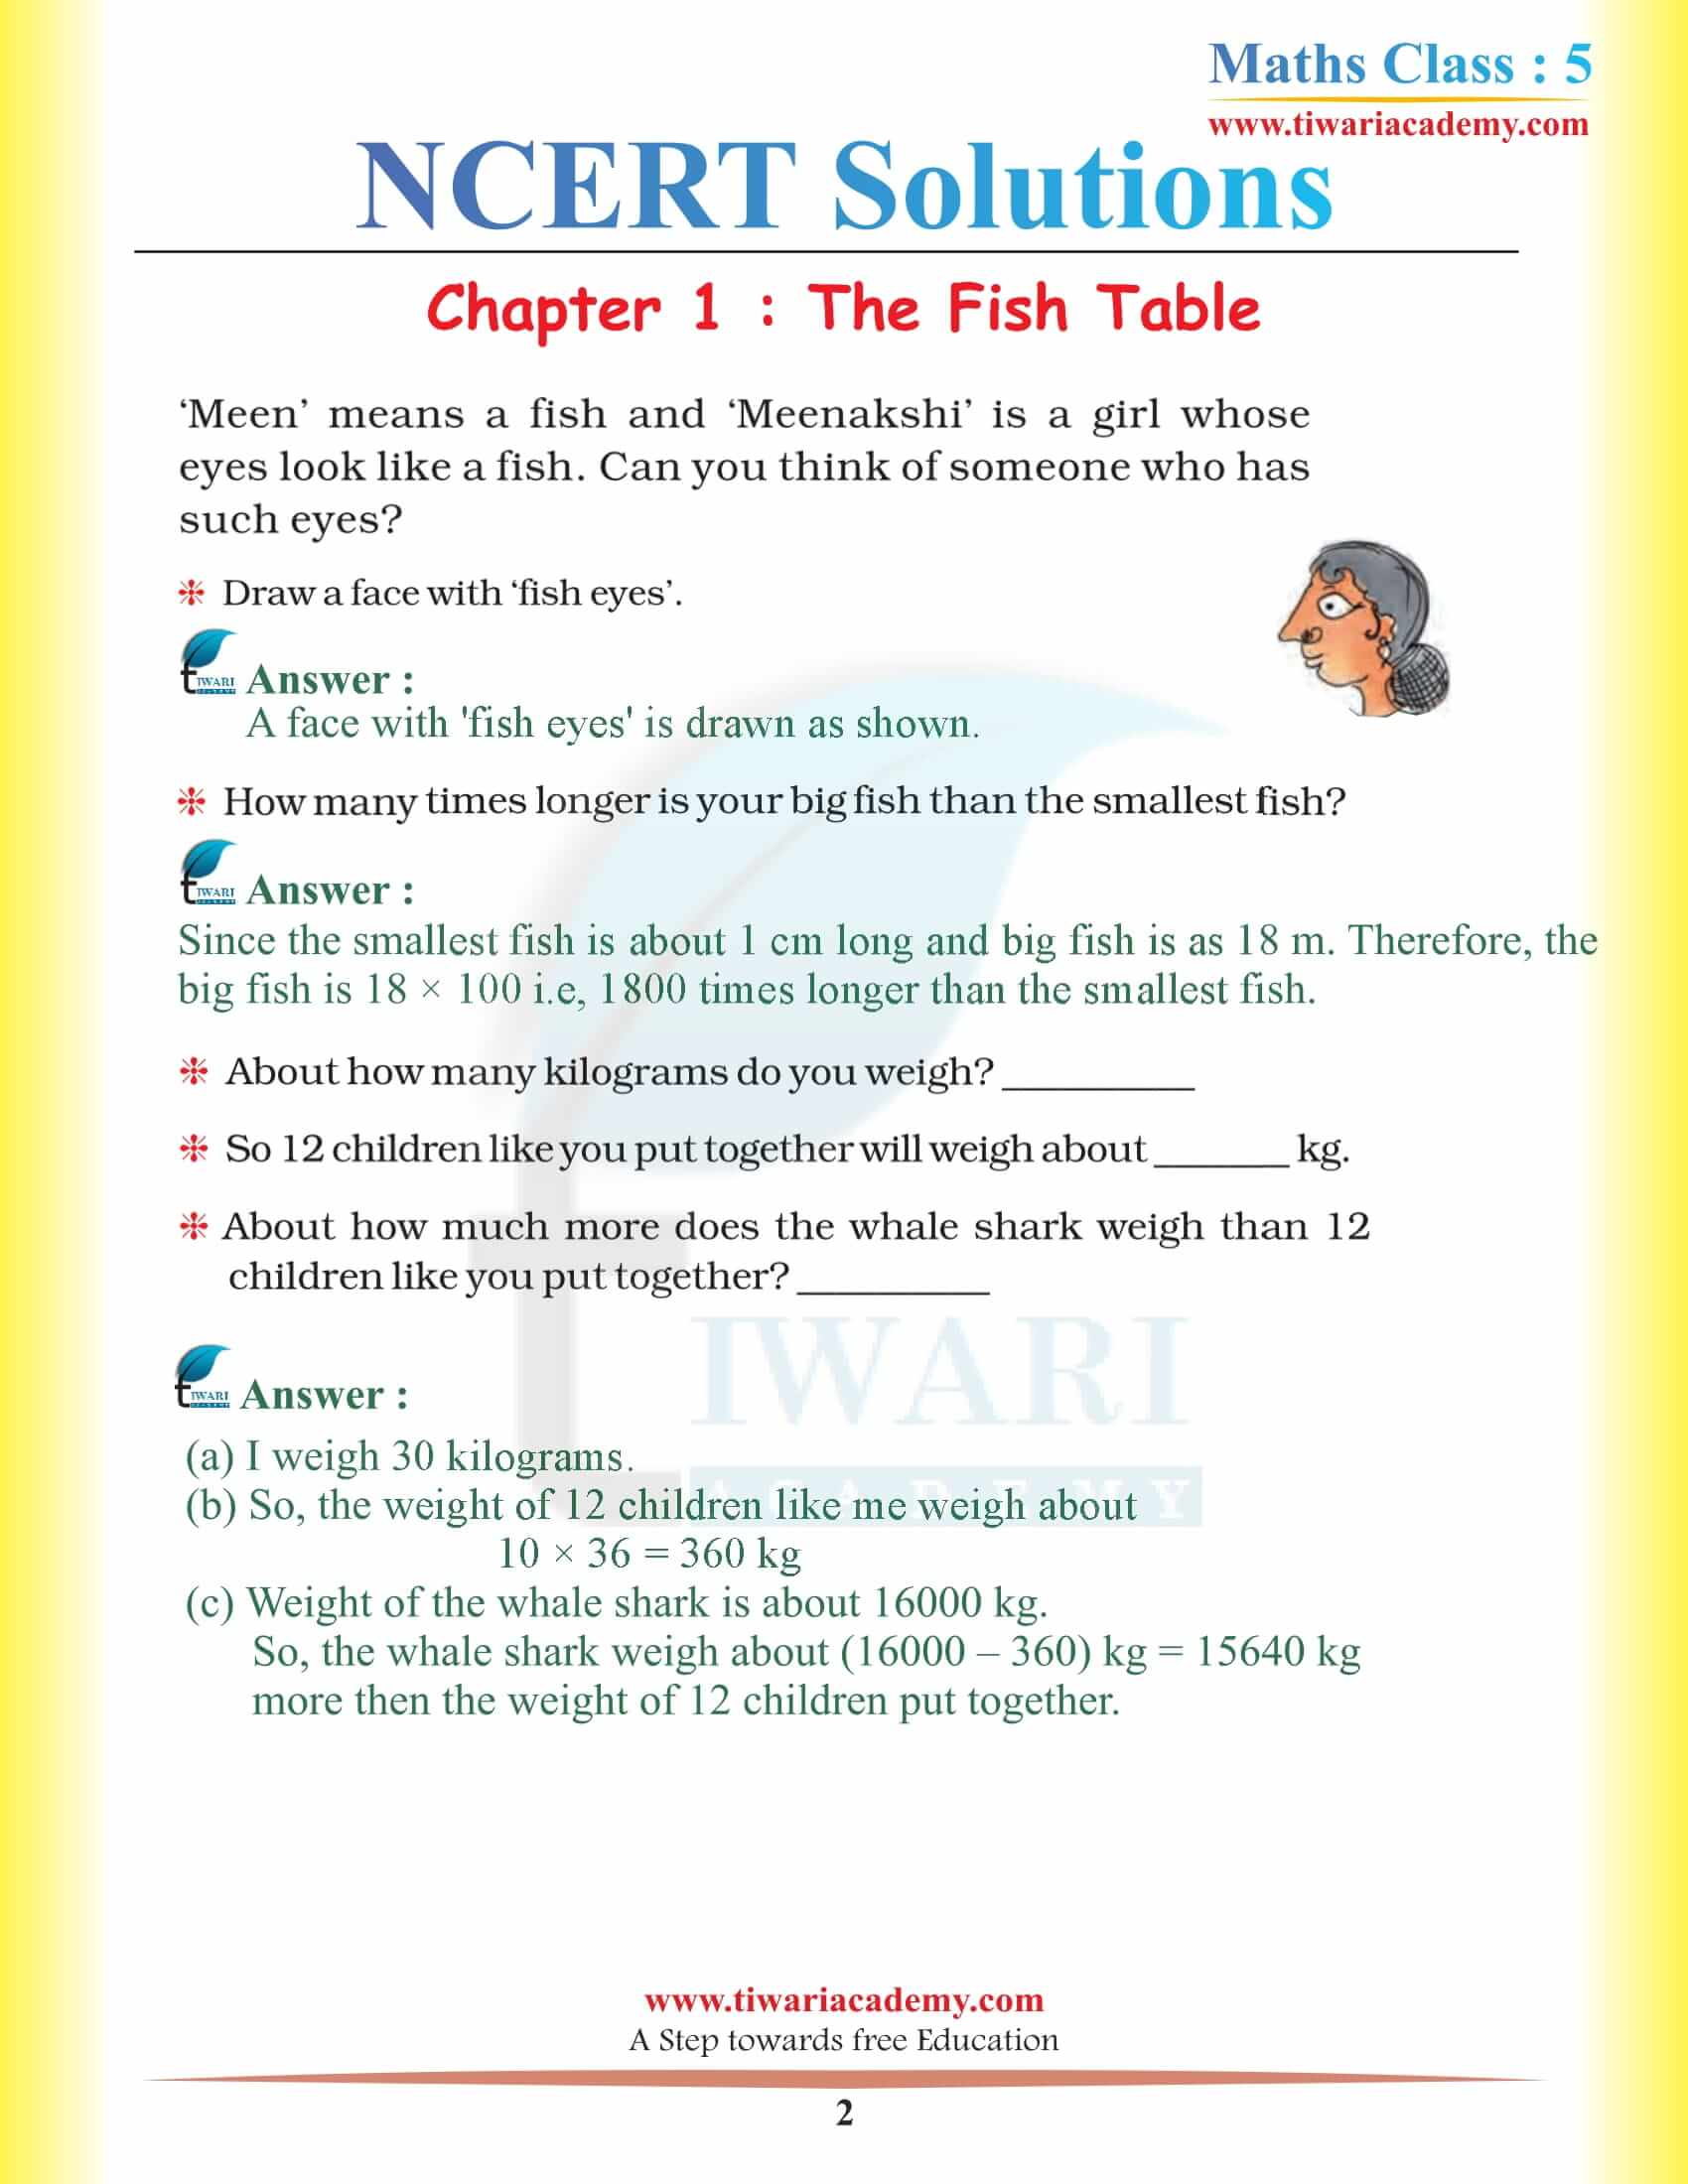 NCERT Solutions for Class 5 Maths Chapter 1 in PDF